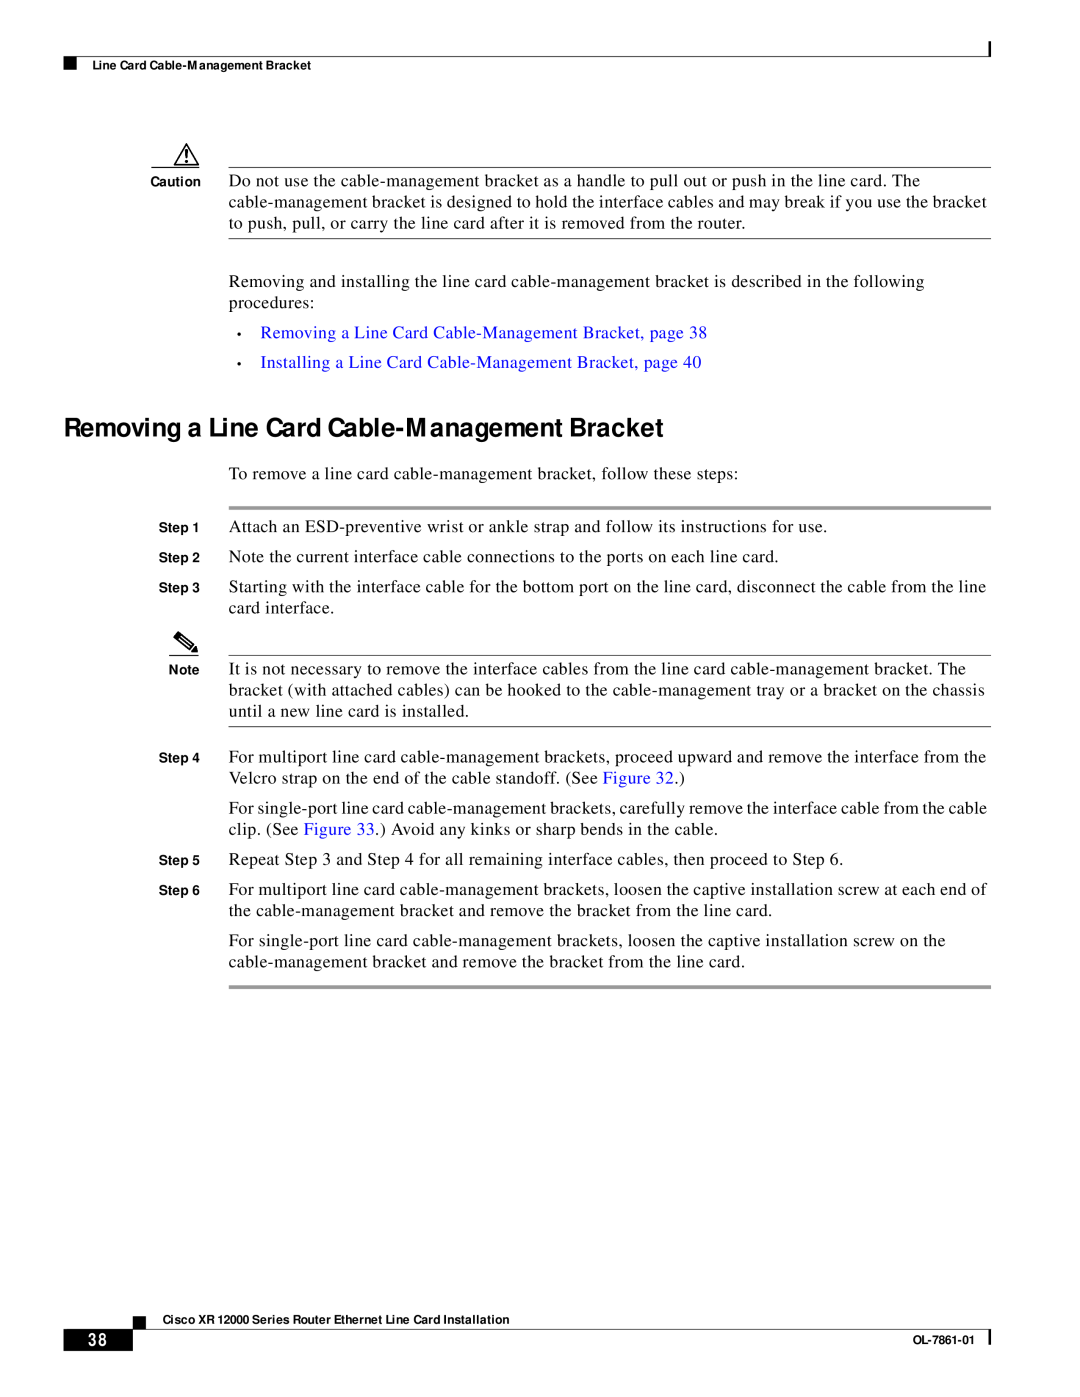 Cisco Systems OL-7861-01 manual Removing a Line Card Cable-Management Bracket 